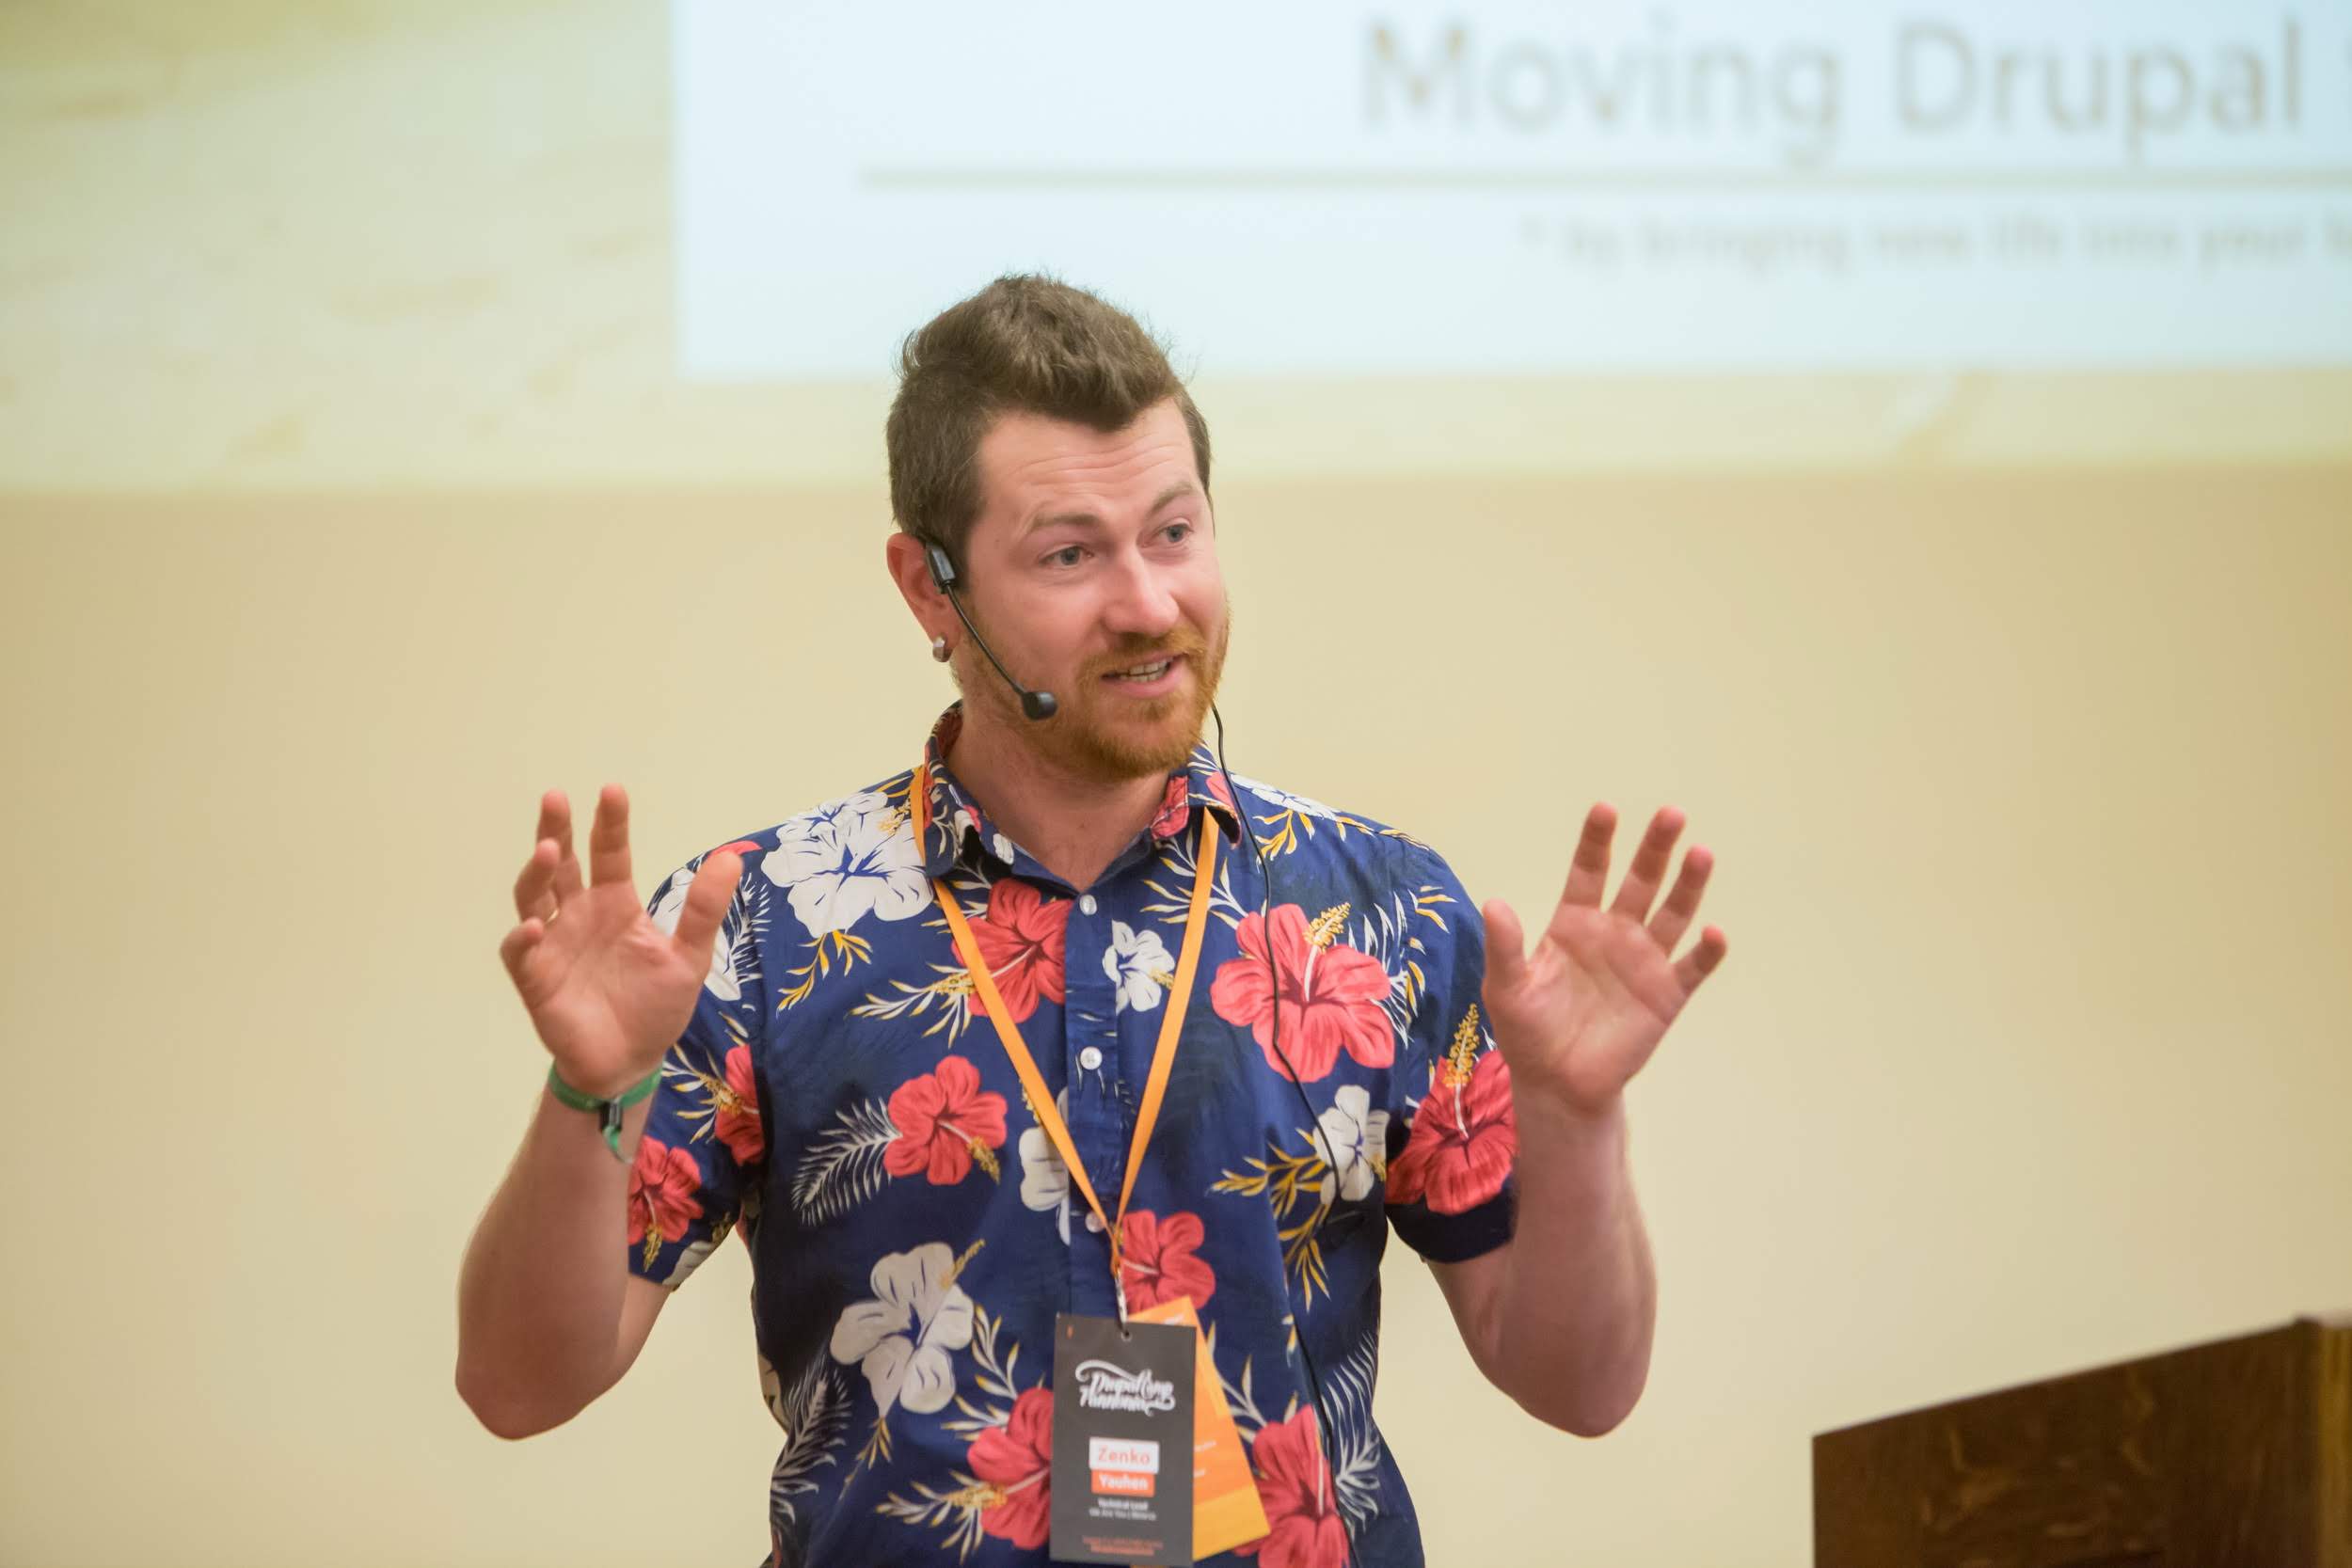 Yuahen talks about local communities at his session in DrupalCamp Pannonia - Photo by Zoran "Zox Studio" Vukmanov